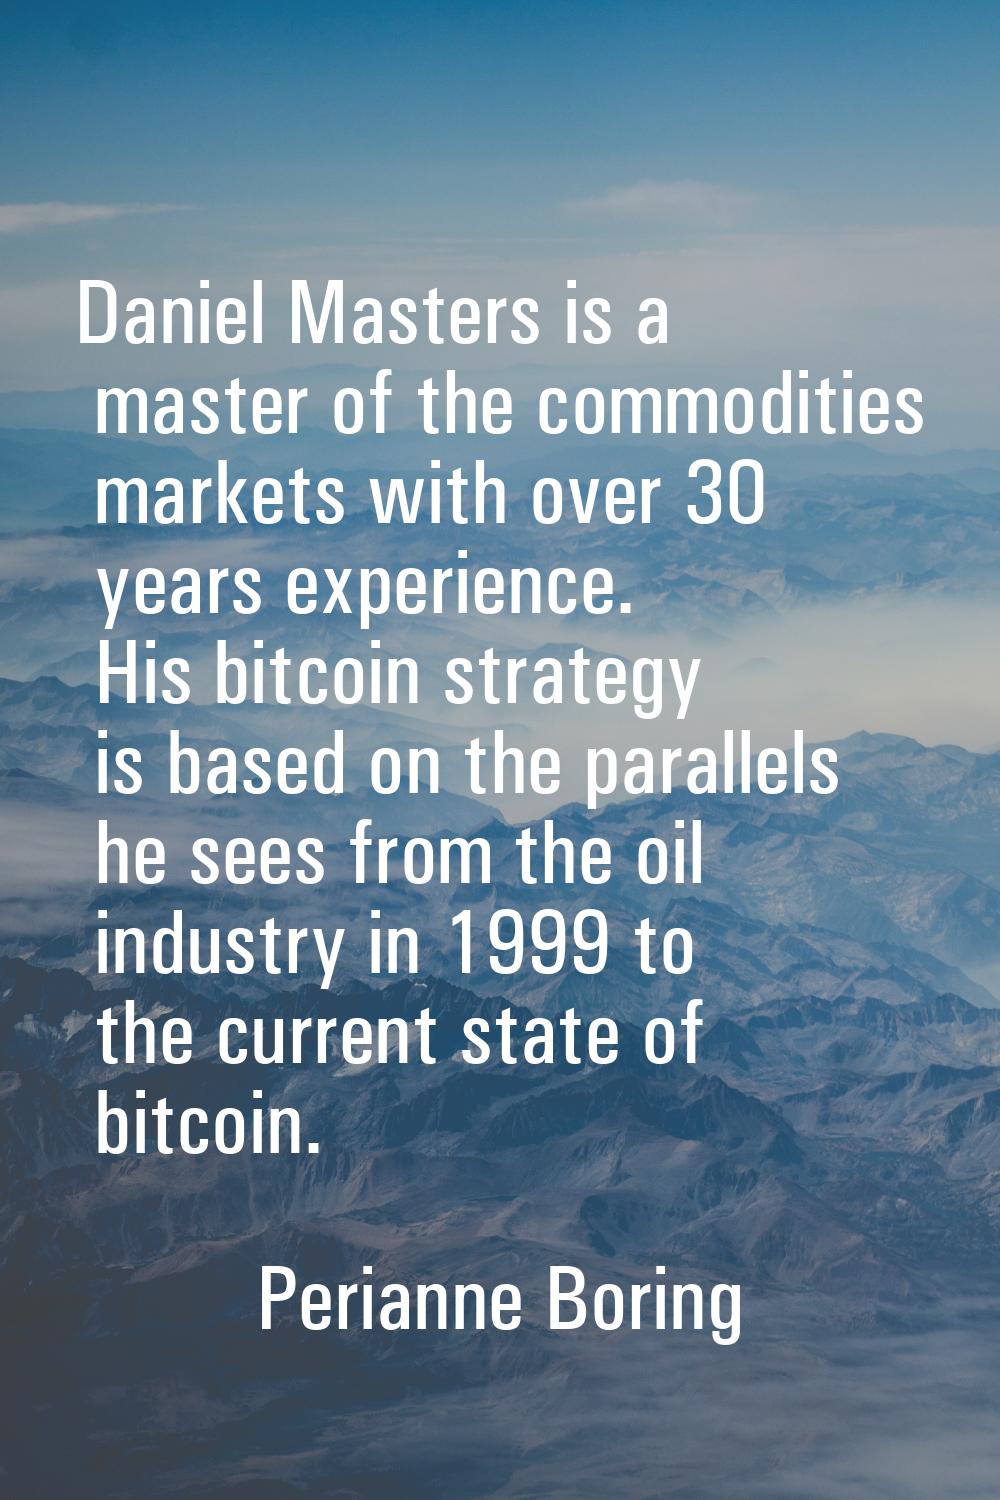 Daniel Masters is a master of the commodities markets with over 30 years experience. His bitcoin st